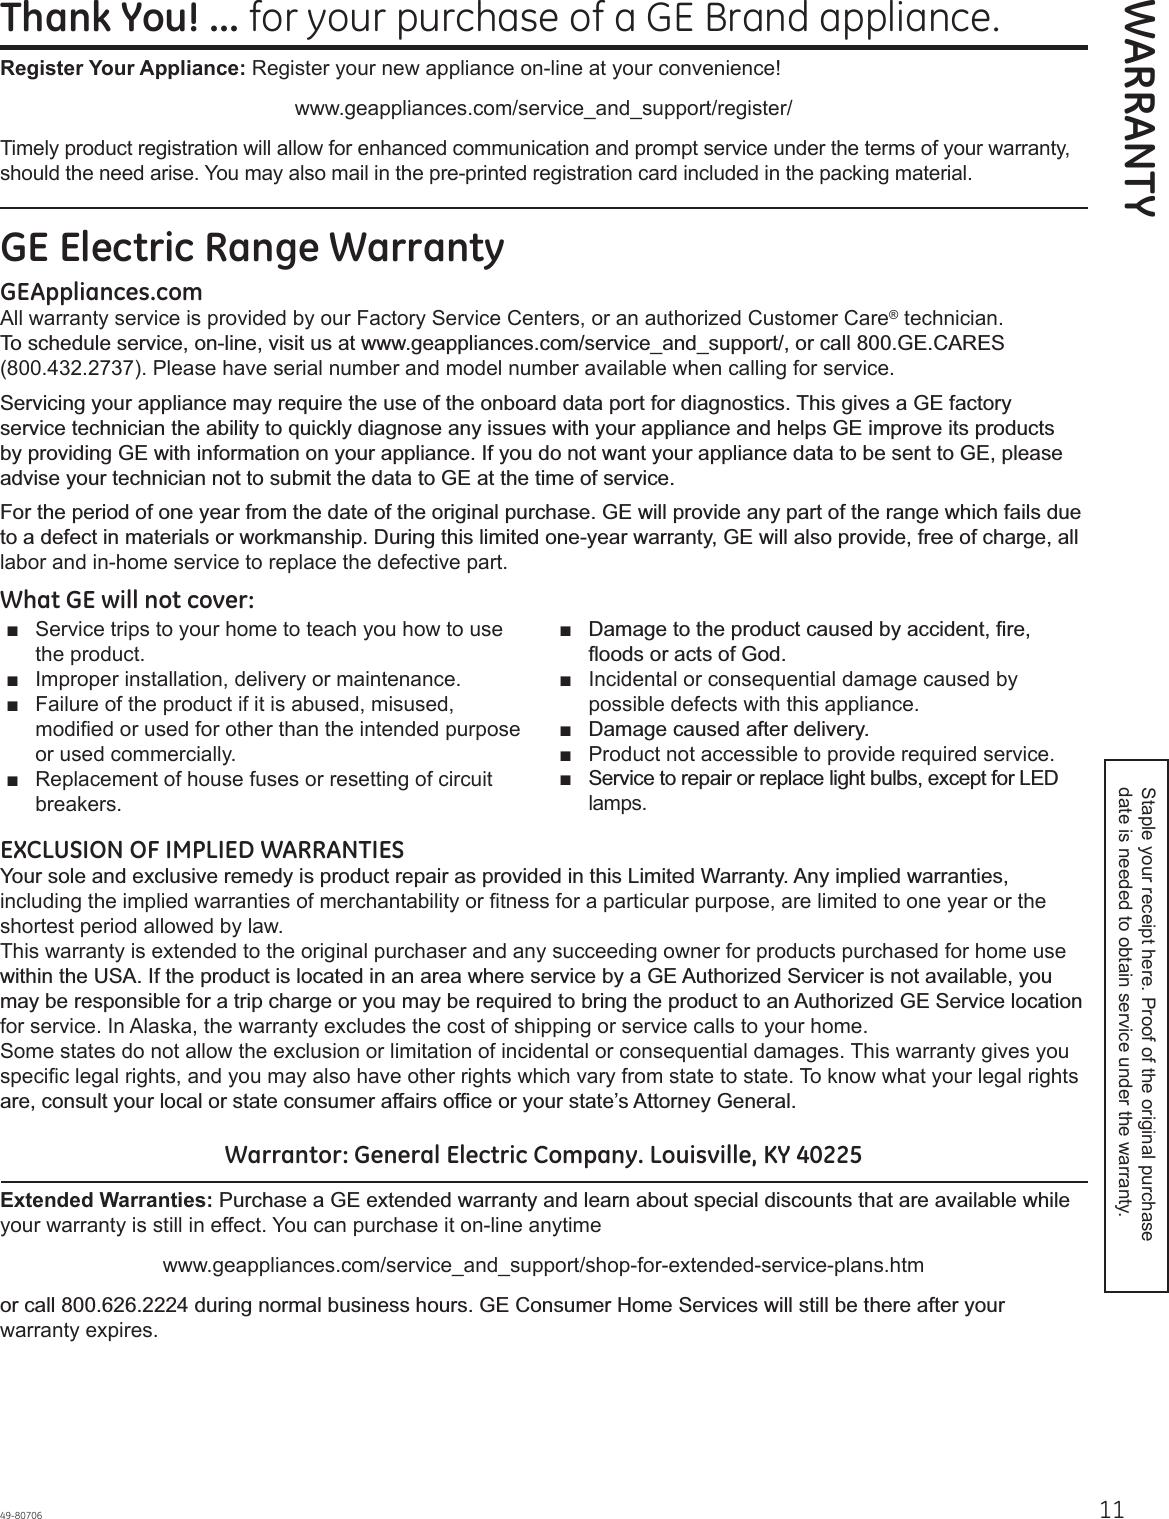 1149-80706Thank You! ... for your purchase of a GE Brand appliance.WARRANTYGE Electric Range WarrantyGEAppliances.comAll warranty service is provided by our Factory Service Centers, or an authorized Customer Care® technician. 7RVFKHGXOHVHUYLFHRQOLQHYLVLWXVDWZZZJHDSSOLDQFHVFRPVHUYLFHBDQGBVXSSRUWRUFDOO*(&amp;$5(6(800.432.2737). Please have serial number and model number available when calling for service.6HUYLFLQJ\RXUDSSOLDQFHPD\UHTXLUHWKHXVHRIWKHRQERDUGGDWDSRUWIRUGLDJQRVWLFV7KLVJLYHVD*(IDFWRU\VHUYLFHWHFKQLFLDQWKHDELOLW\WRTXLFNO\GLDJQRVHDQ\LVVXHVZLWK\RXUDSSOLDQFHDQGKHOSV*(LPSURYHLWVSURGXFWVE\SURYLGLQJ*(ZLWKLQIRUPDWLRQRQ\RXUDSSOLDQFH,I\RXGRQRWZDQW\RXUDSSOLDQFHGDWDWREHVHQWWR*(SOHDVHDGYLVH\RXUWHFKQLFLDQQRWWRVXEPLWWKHGDWDWR*(DWWKHWLPHRIVHUYLFH)RUWKHSHULRGRIRQH\HDUIURPWKHGDWHRIWKHRULJLQDOSXUFKDVH*(ZLOOSURYLGHDQ\SDUWRIWKHUDQJHZKLFKIDLOVGXHWRDGHIHFWLQPDWHULDOVRUZRUNPDQVKLS&apos;XULQJWKLVOLPLWHGRQH\HDUZDUUDQW\*(ZLOODOVRSURYLGHIUHHRIFKDUJHDOOlabor and in-home service to replace the defective part.What GE will not cover:Ŷ Service trips to your home to teach you how to use the product. Ŷ Improper installation, delivery or maintenance. Ŷ Failure of the product if it is abused, misused, modified or used for other than the intended purpose or used commercially. Ŷ Replacement of house fuses or resetting of circuit breakers. Ŷ &apos;DPDJHWRWKHSURGXFWFDXVHGE\DFFLGHQWILUHIORRGVRUDFWVRI*RGŶ Incidental or consequential damage caused by possible defects with this appliance. Ŷ &apos;DPDJHFDXVHGDIWHUGHOLYHU\Ŷ Product not accessible to provide required service.Ŷ 6HUYLFHWRUHSDLURUUHSODFHOLJKWEXOEVH[FHSWIRU/(&apos;lamps.EXCLUSION OF IMPLIED WARRANTIES&lt;RXUVROHDQGH[FOXVLYHUHPHG\LVSURGXFWUHSDLUDVSURYLGHGLQWKLV/LPLWHG:DUUDQW\$Q\LPSOLHGZDUUDQWLHVincluding the implied warranties of merchantability or fitness for a particular purpose, are limited to one year or the shortest period allowed by law. This warranty is extended to the original purchaser and any succeeding owner for products purchased for home use ZLWKLQWKH86$,IWKHSURGXFWLVORFDWHGLQDQDUHDZKHUHVHUYLFHE\D*($XWKRUL]HG6HUYLFHULVQRWDYDLODEOH\RXPD\EHUHVSRQVLEOHIRUDWULSFKDUJHRU\RXPD\EHUHTXLUHGWREULQJWKHSURGXFWWRDQ$XWKRUL]HG*(6HUYLFHORFDWLRQfor service. In Alaska, the warranty excludes the cost of shipping or service calls to your home. Some states do not allow the exclusion or limitation of incidental or consequential damages. This warranty gives you specific legal rights, and you may also have other rights which vary from state to state. To know what your legal rights DUHFRQVXOW\RXUORFDORUVWDWHFRQVXPHUDIIDLUVRIILFHRU\RXUVWDWH¶V$WWRUQH\*HQHUDOWarrantor: General Electric Company. Louisville, KY 40225Extended Warranties:3XUFKDVHD*(H[WHQGHGZDUUDQW\DQGOHDUQDERXWVSHFLDOGLVFRXQWVWKDWDUHDYDLODEOHZKLOHyour warranty is still in effect. You can purchase it on-line anytimewww.geappliances.com/service_and_support/shop-for-extended-service-plans.htmRUFDOOGXULQJQRUPDOEXVLQHVVKRXUV*(&amp;RQVXPHU+RPH6HUYLFHVZLOOVWLOOEHWKHUHDIWHU\RXUwarranty expires.Register Your Appliance: Register your new appliance on-line at your convenience! www.geappliances.com/service_and_support/register/Timely product registration will allow for enhanced communication and prompt service under the terms of your warranty, should the need arise. You may also mail in the pre-printed registration card included in the packing material.Staple your receipt here. Proof of the original purchase date is needed to obtain service under the warranty.